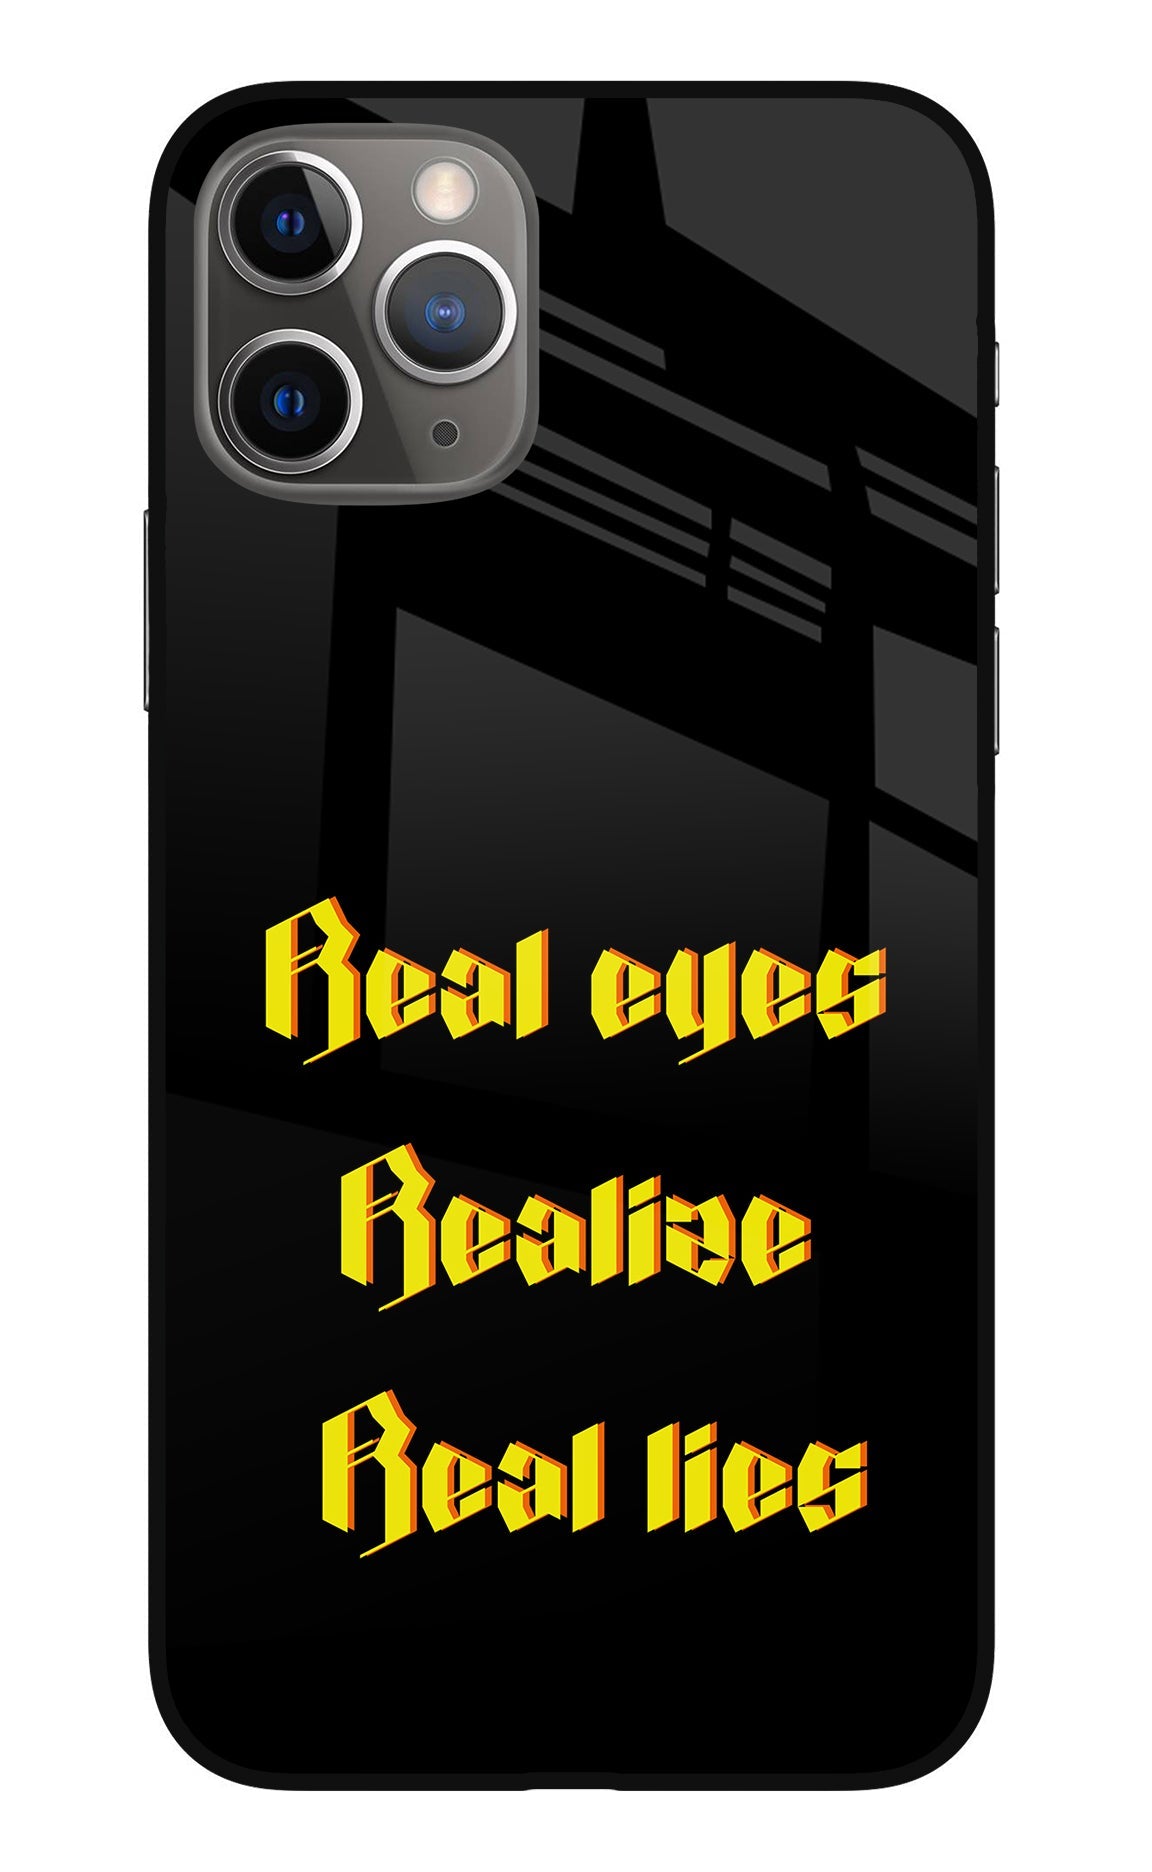 Real Eyes Realize Real Lies iPhone 11 Pro Max Glass Case